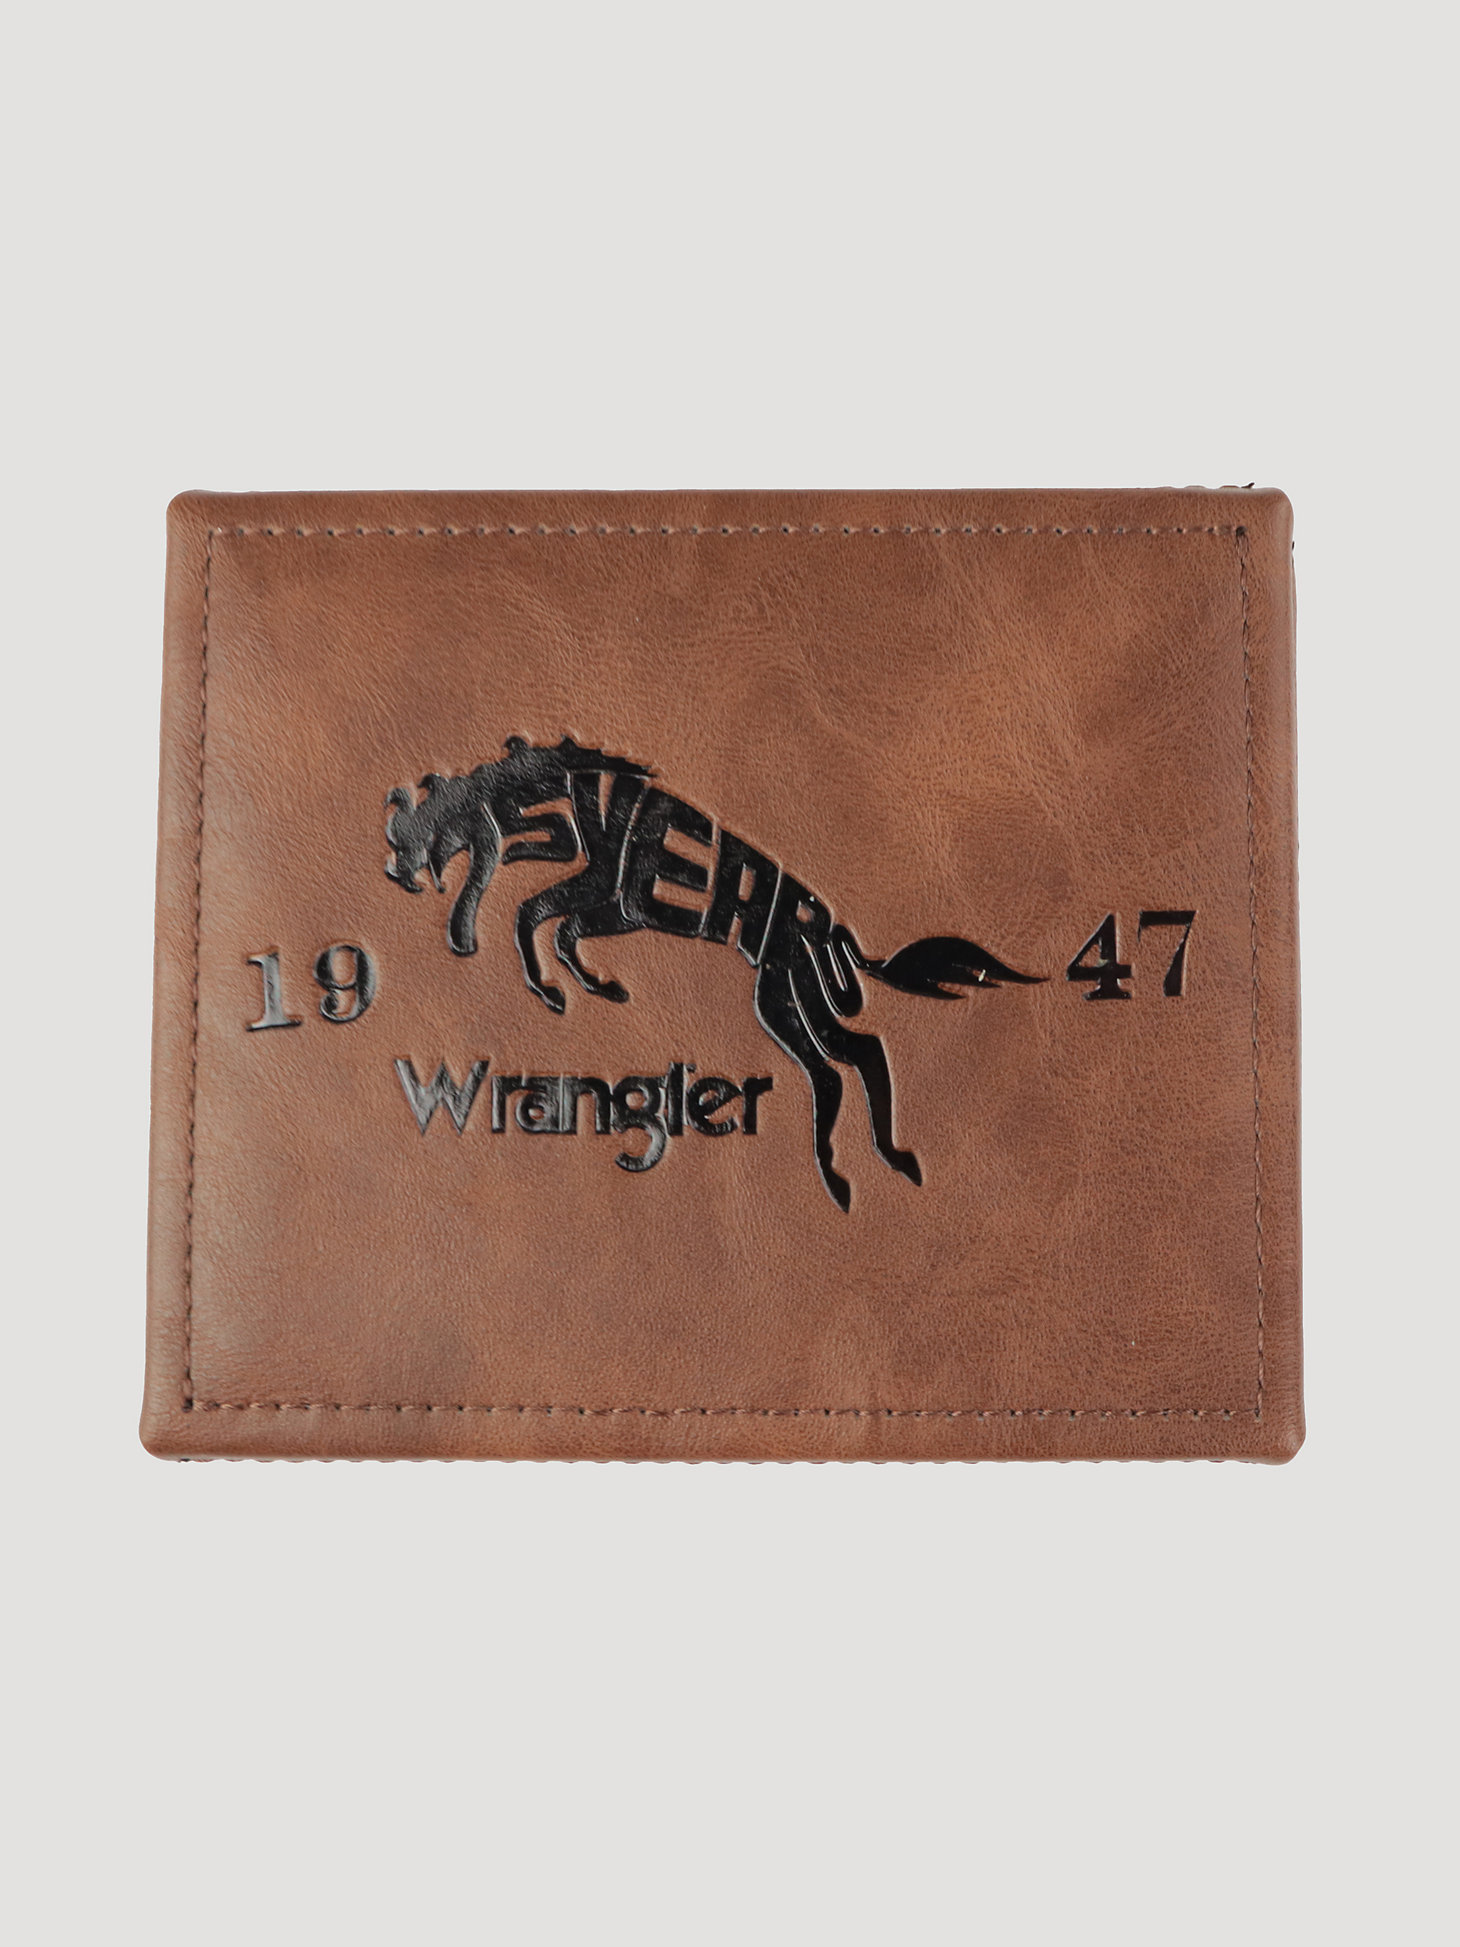 Wrangler Tooled Leather Bifold Wallet in Brown alternative view 2